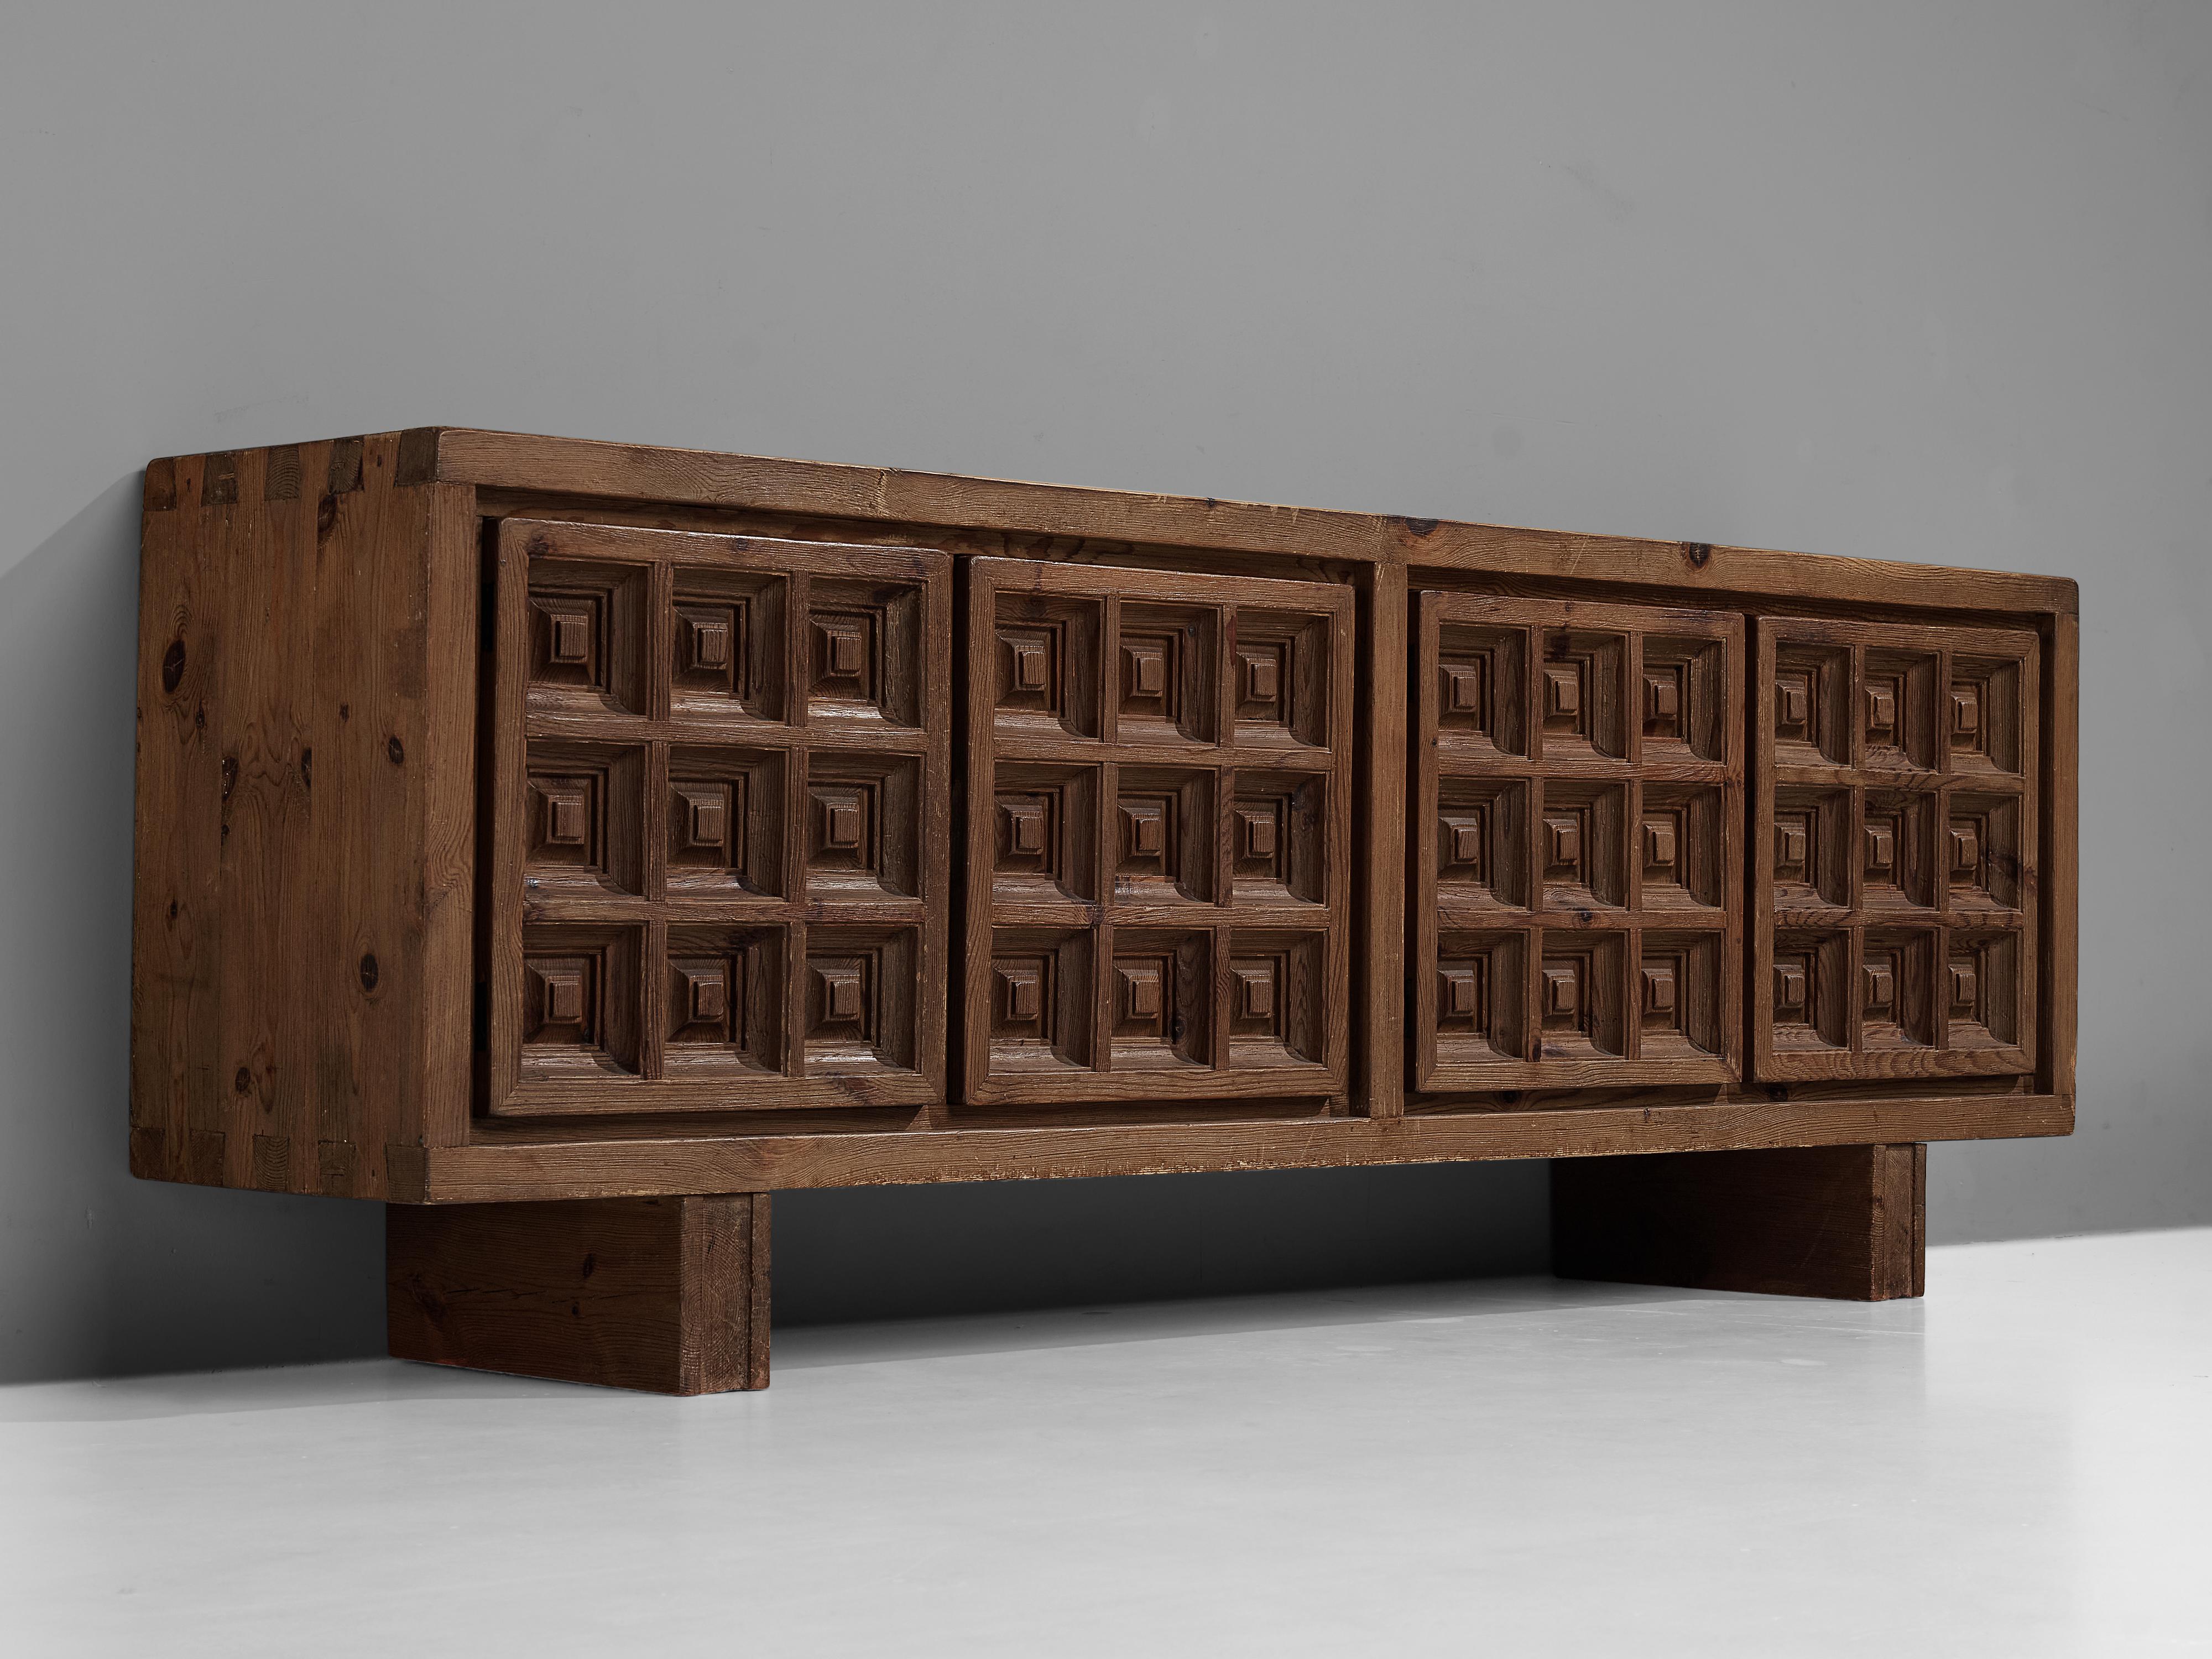 Biosca, sideboard, stained pine, Spain, 1960s.

Outstanding Spanish sideboard that is executed by Biosca in a beautiful way. The four-door credenza features doors with a graphic carved pattern. This is very typical for Brutalist style, while the